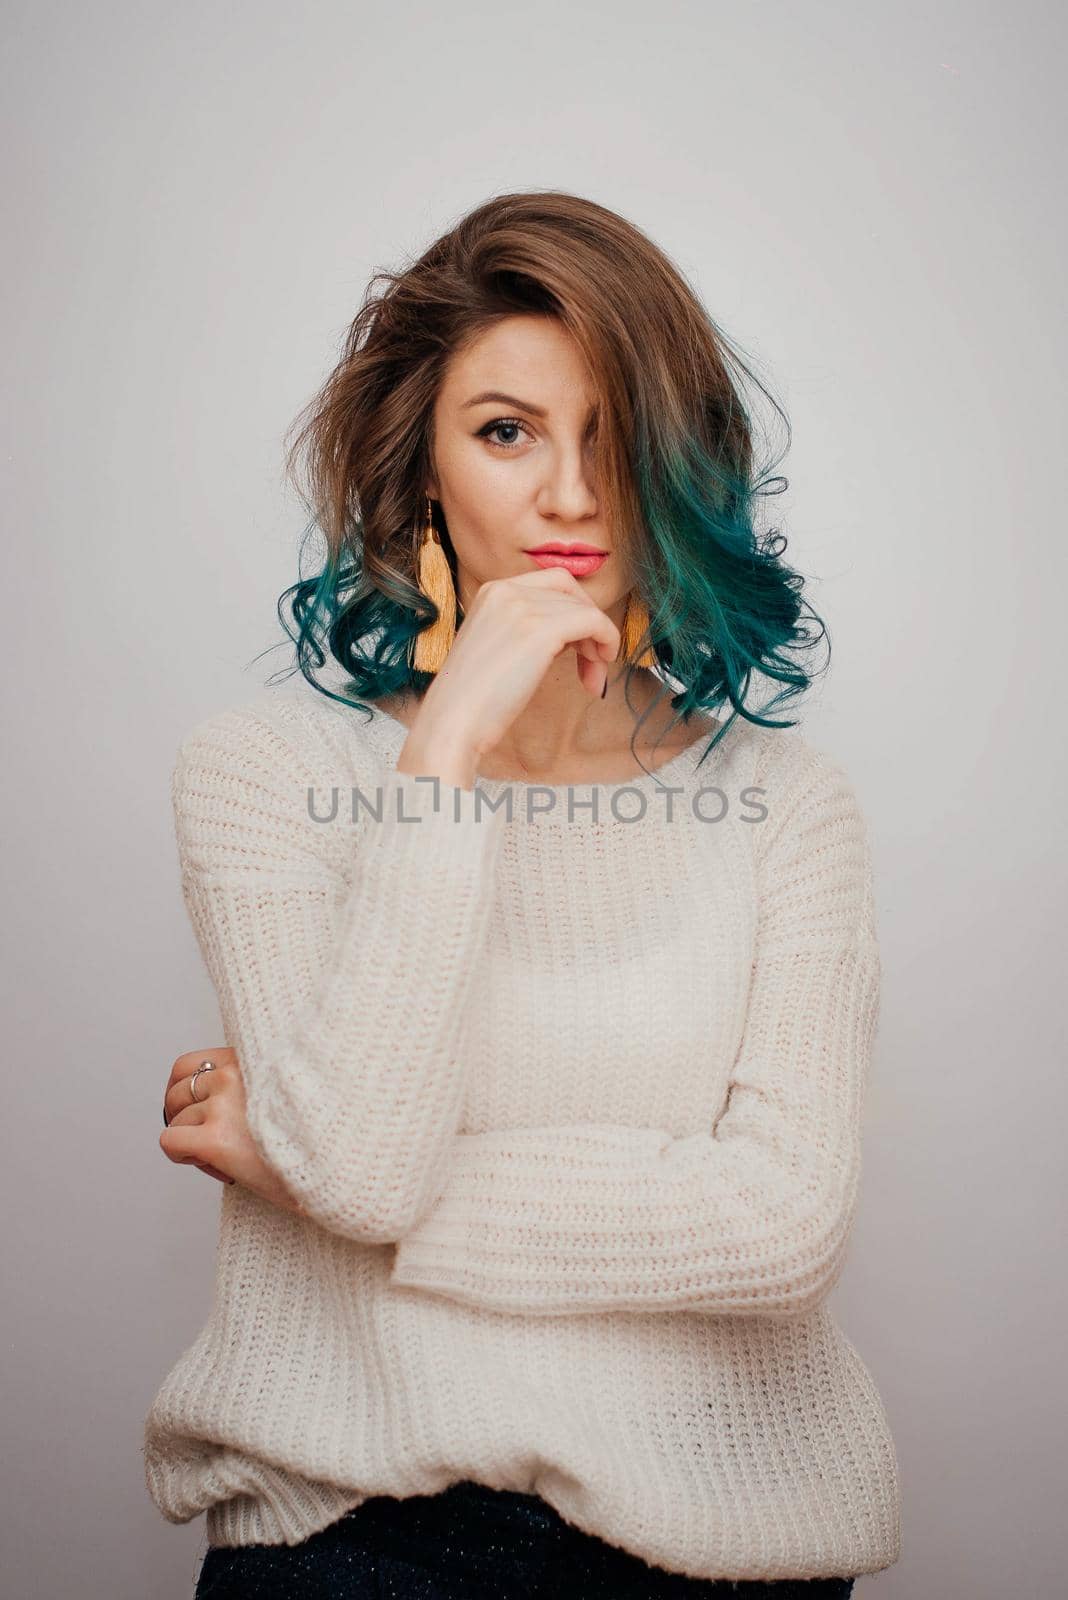 Pretty woman portrait with colored hair on a white background by RecCameraStock